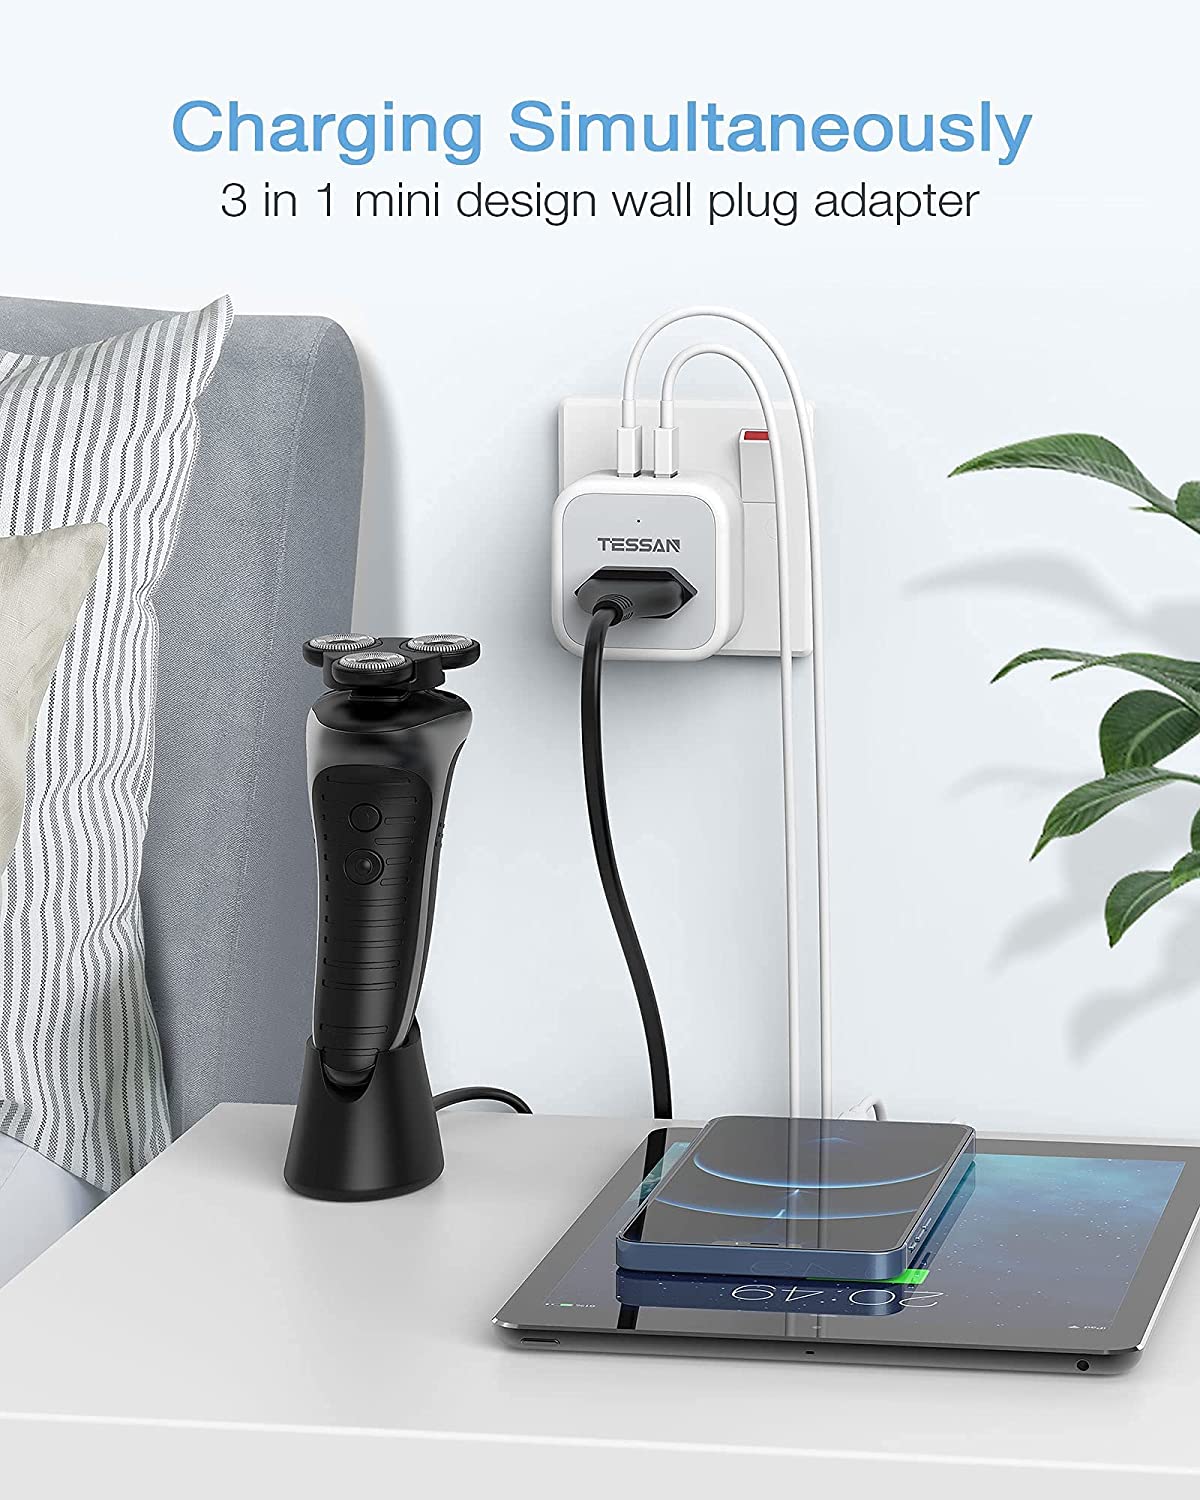 Shaver Charger 2 Pin to 3 Pin Adapter Plug Socket with 2 USB for Bathroom Electric Toothbrush